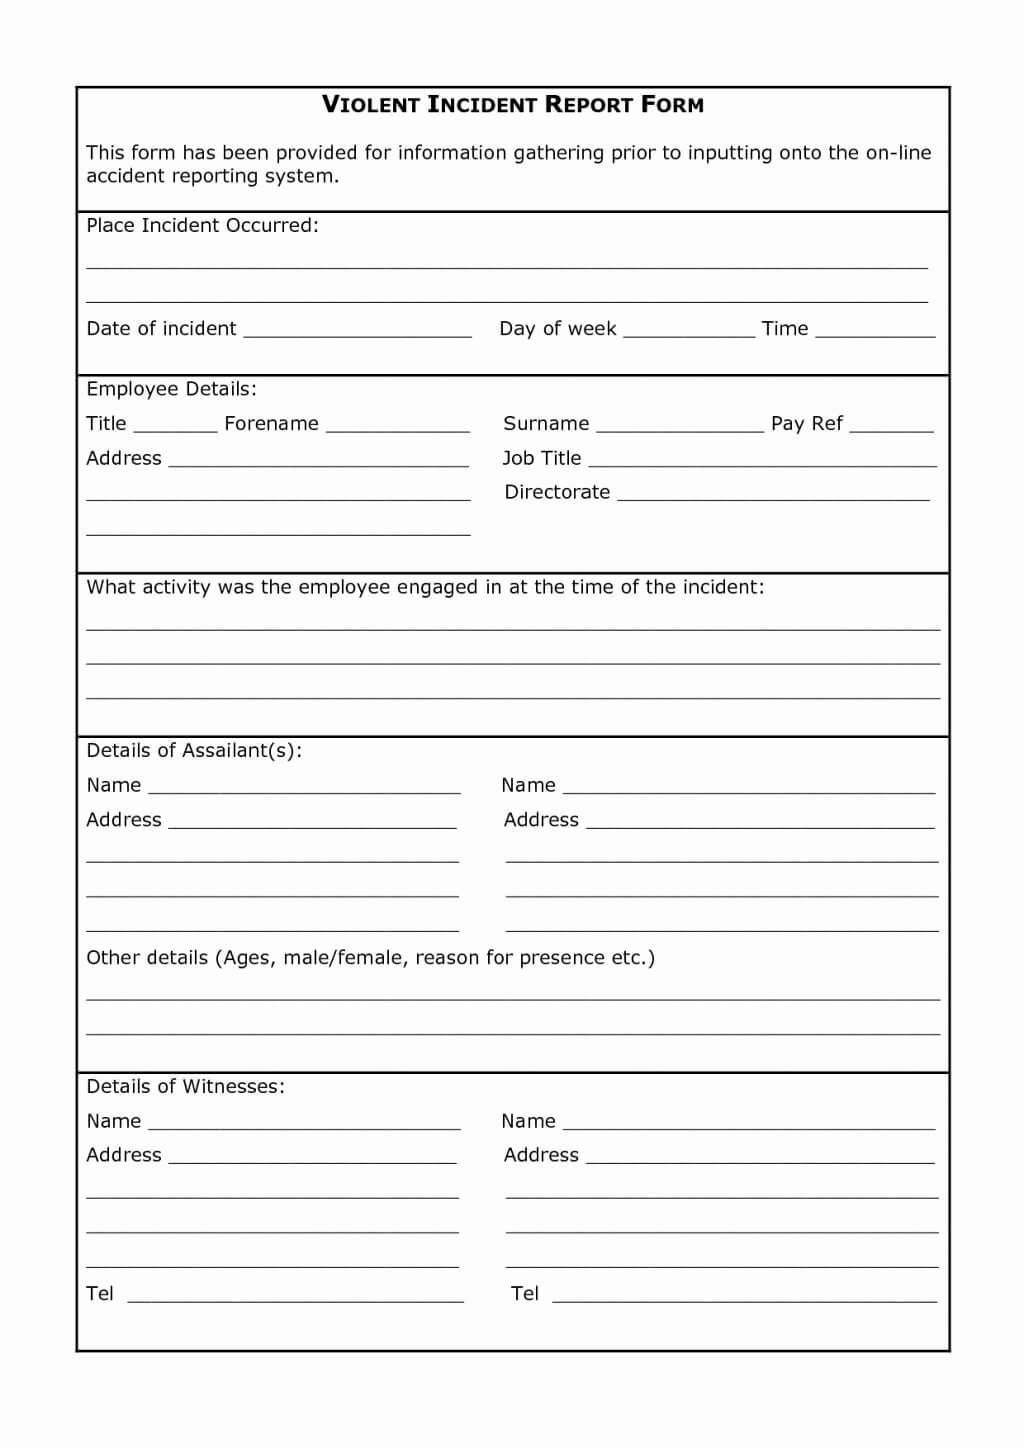 034 Incident Report Form Template Word Work Lovely Accident With Health And Safety Incident Report Form Template